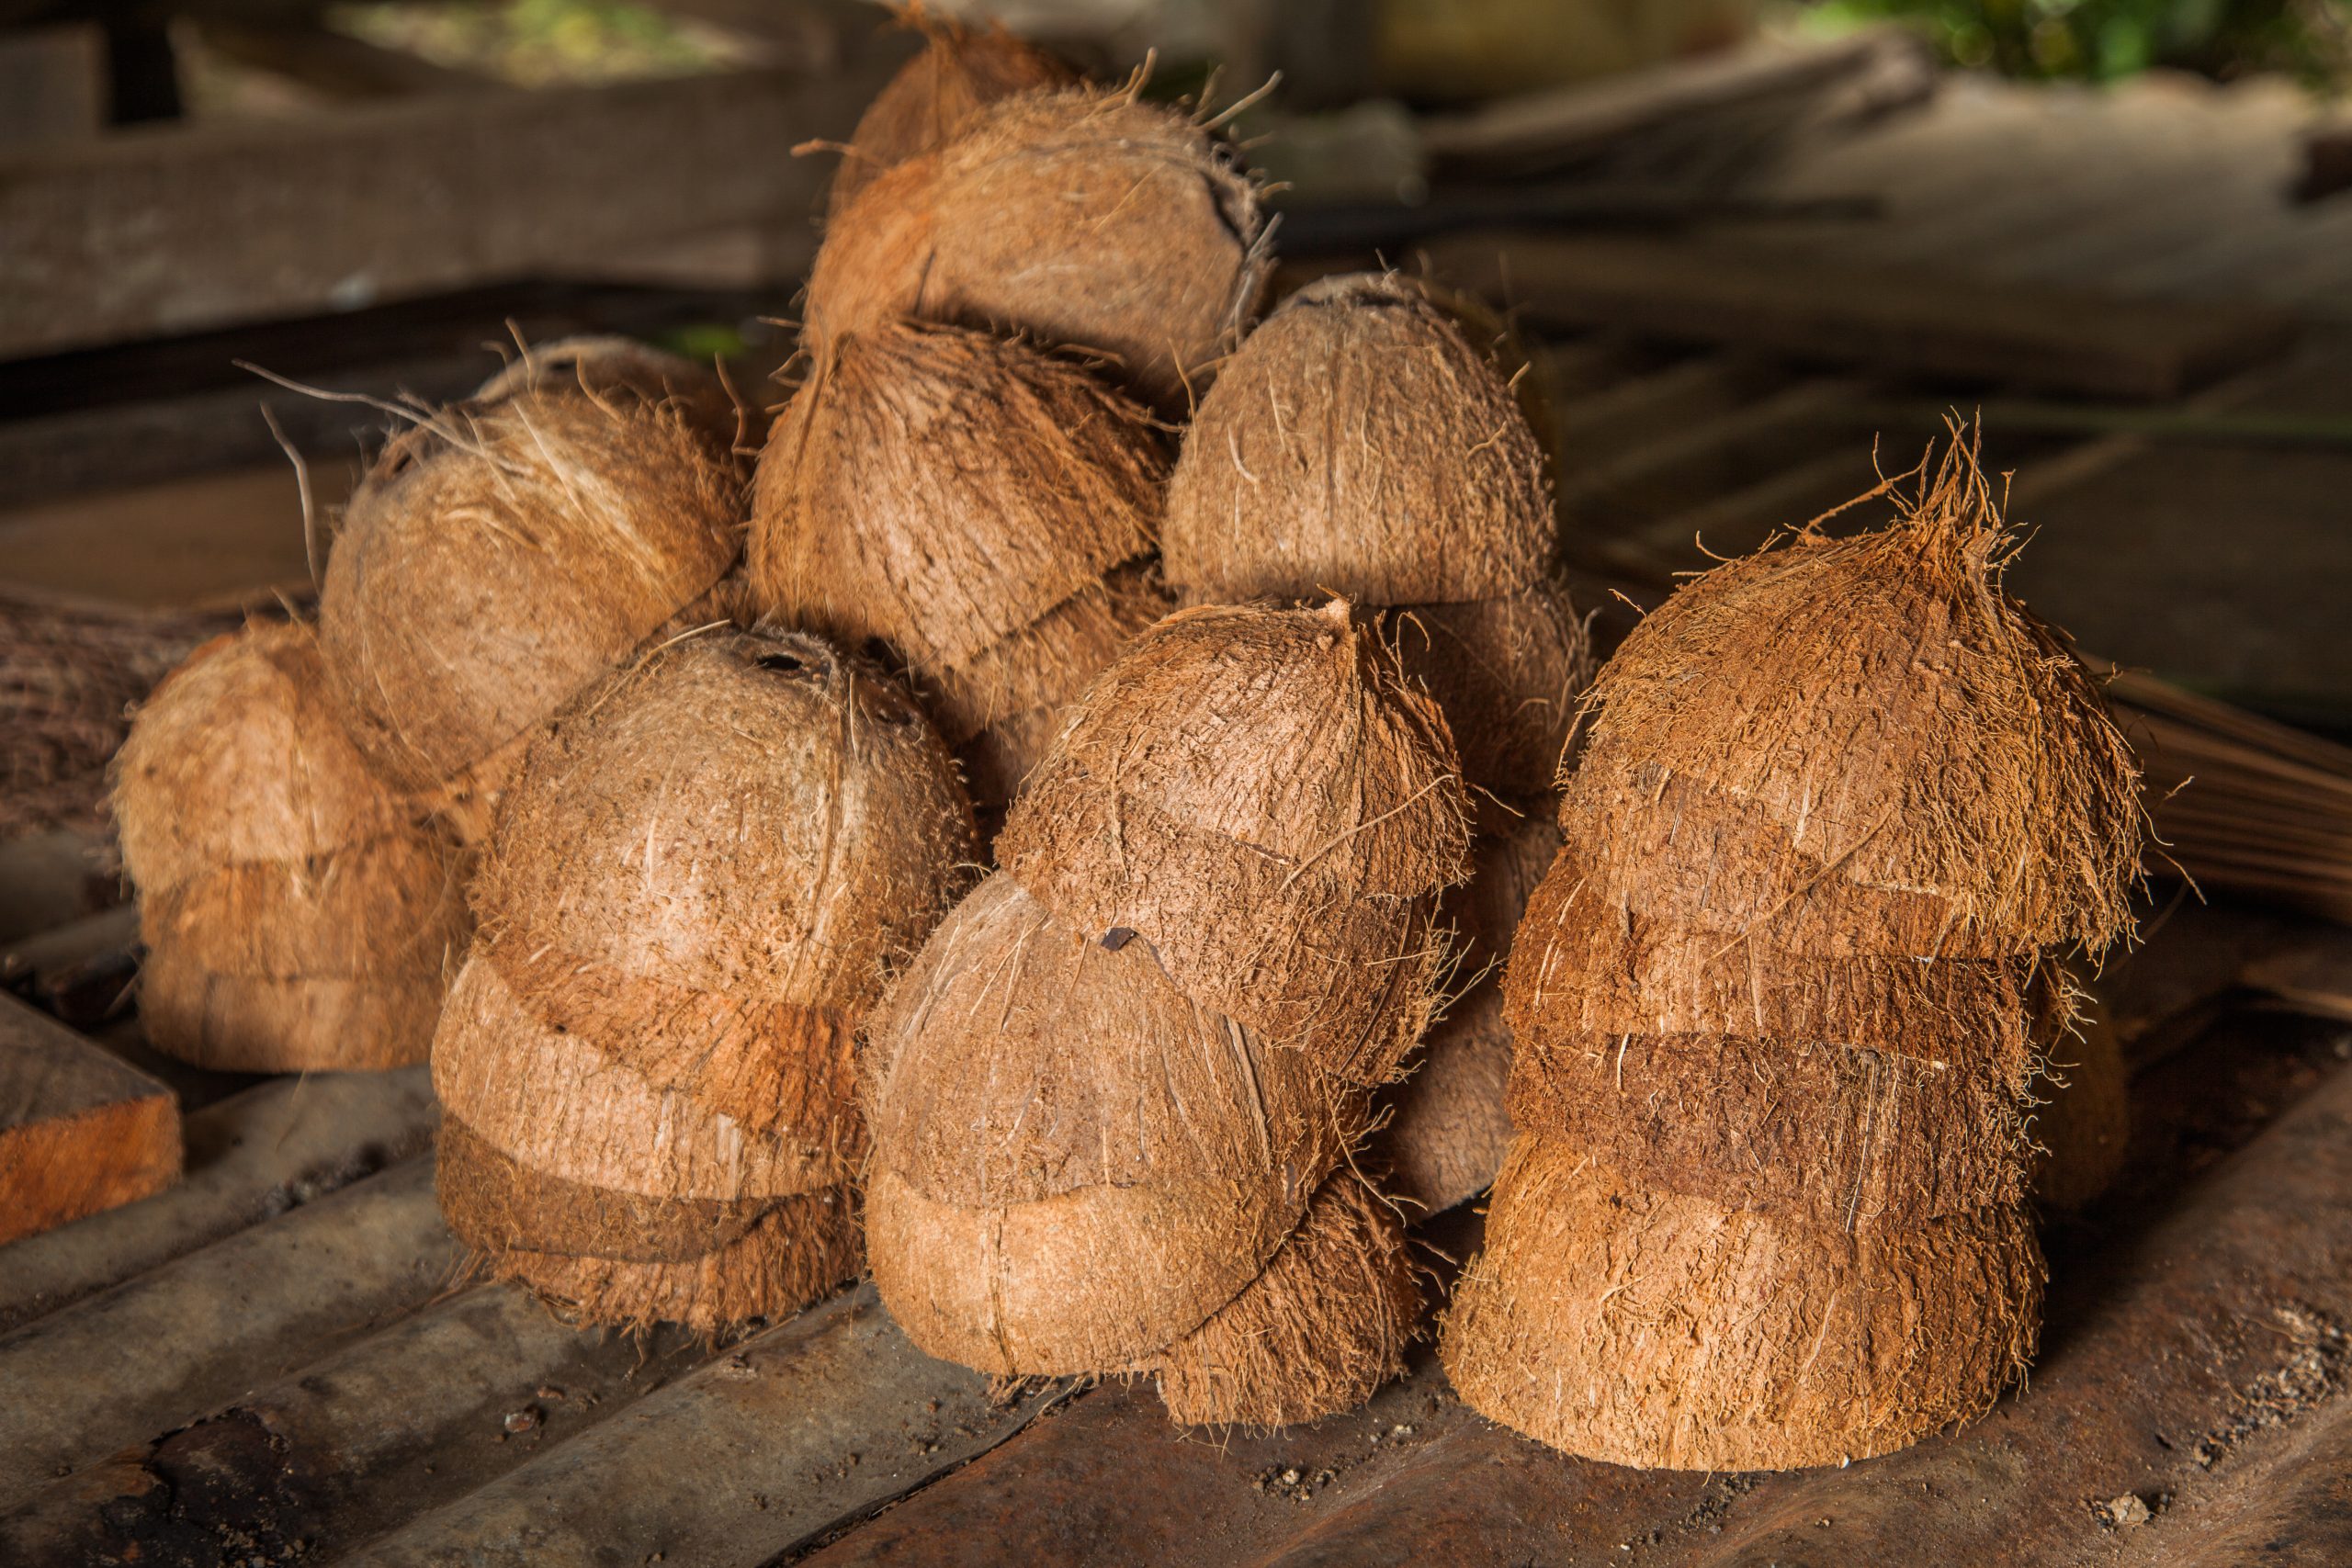 A pile of halved coconuts.